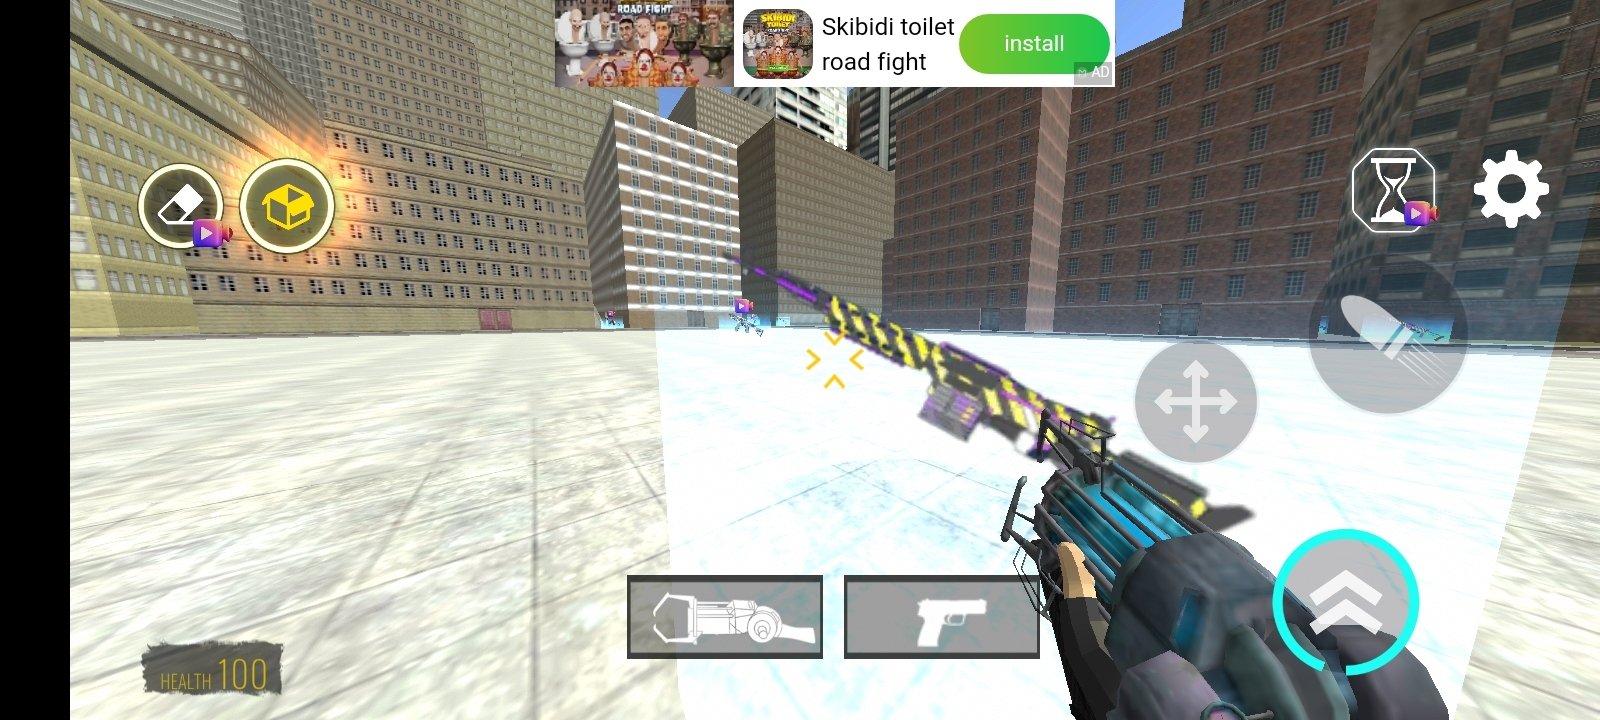 Nextbots In Backrooms: Shooter for Android - Download the APK from Uptodown